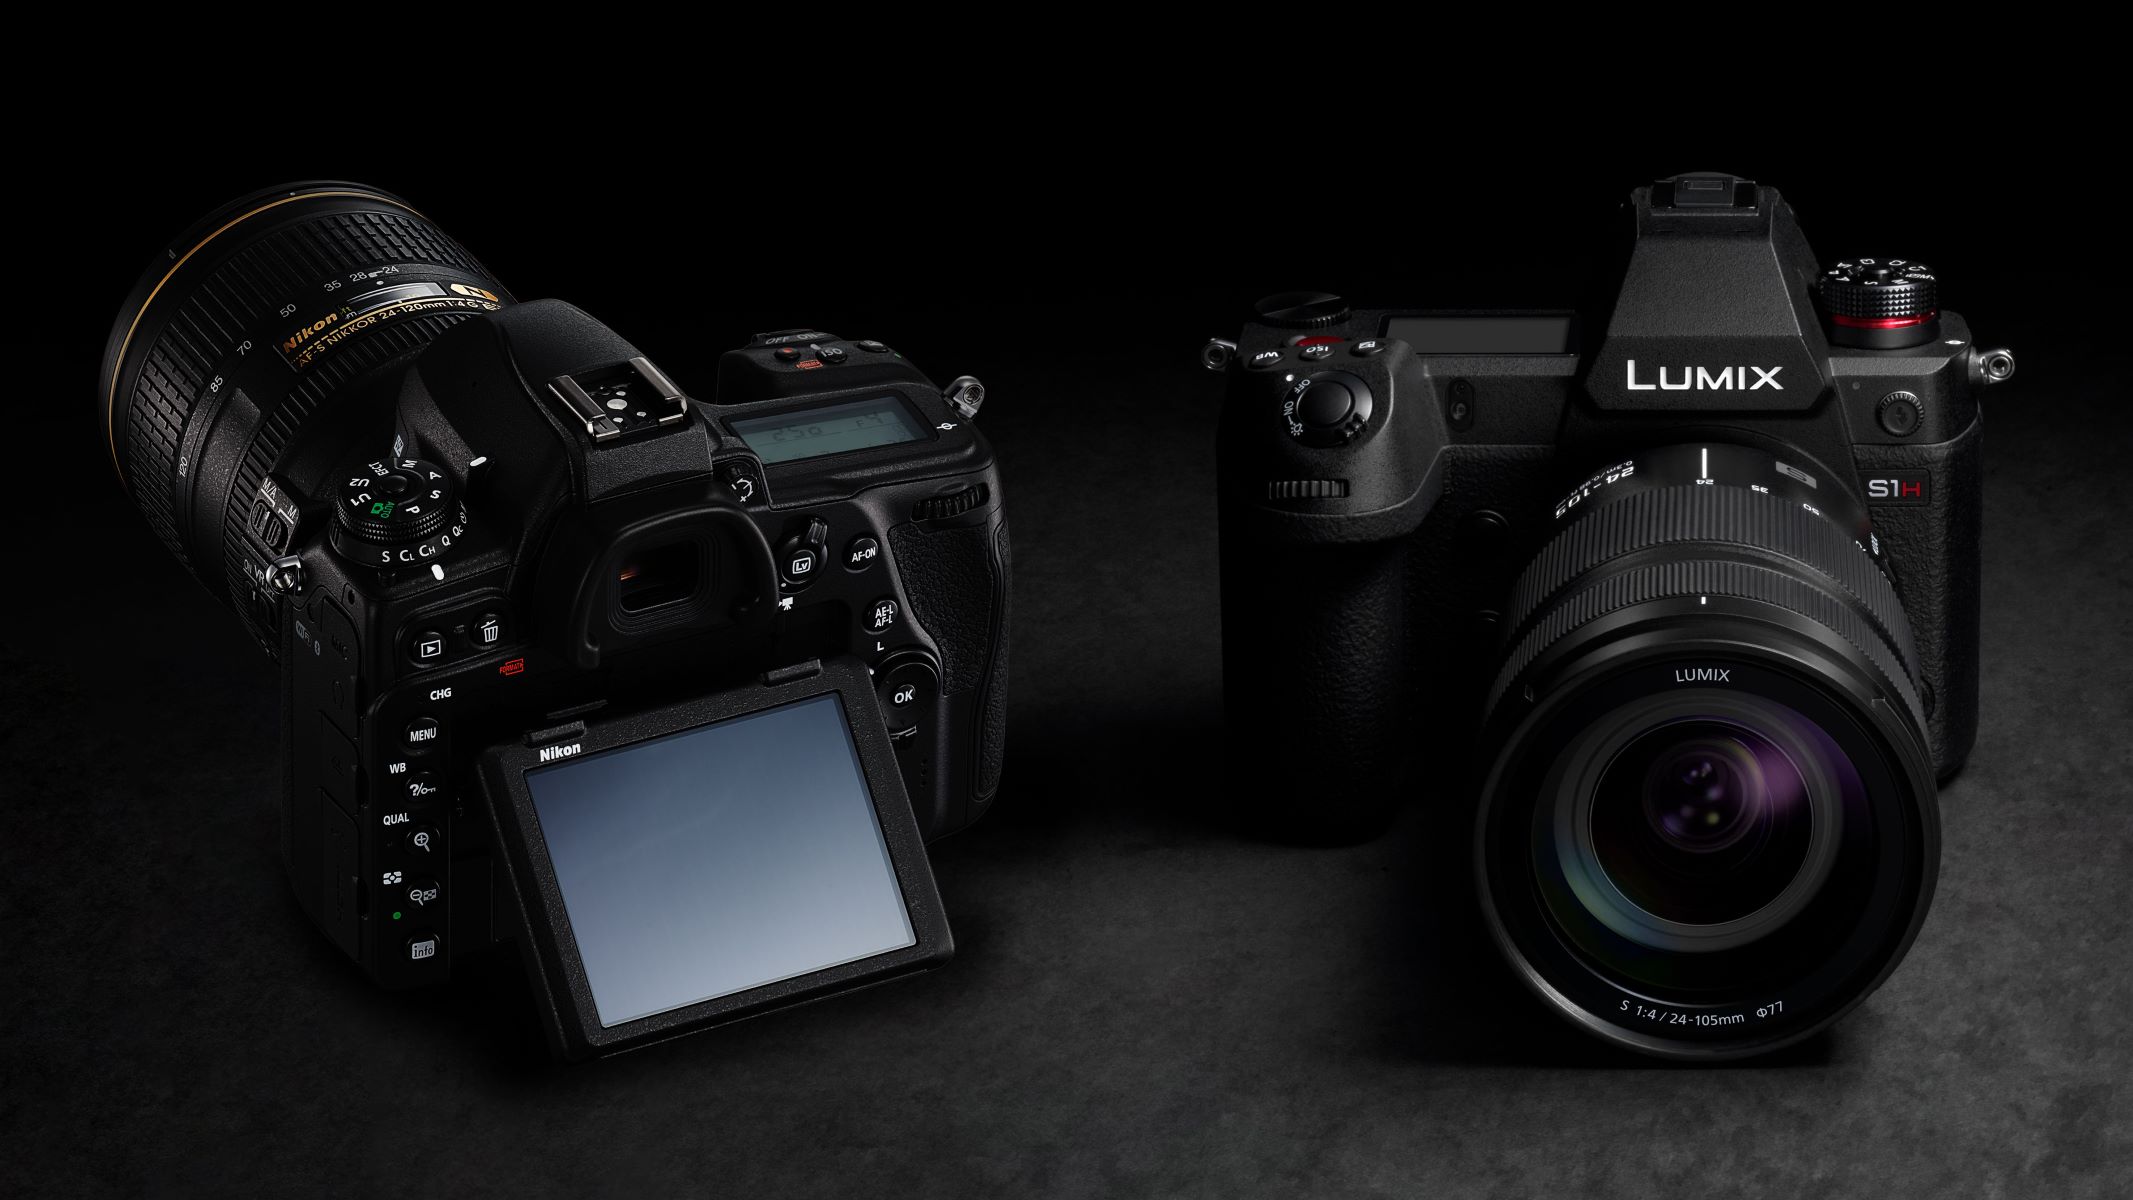 mirror-or-mirrorless-dslr-camera-which-is-better